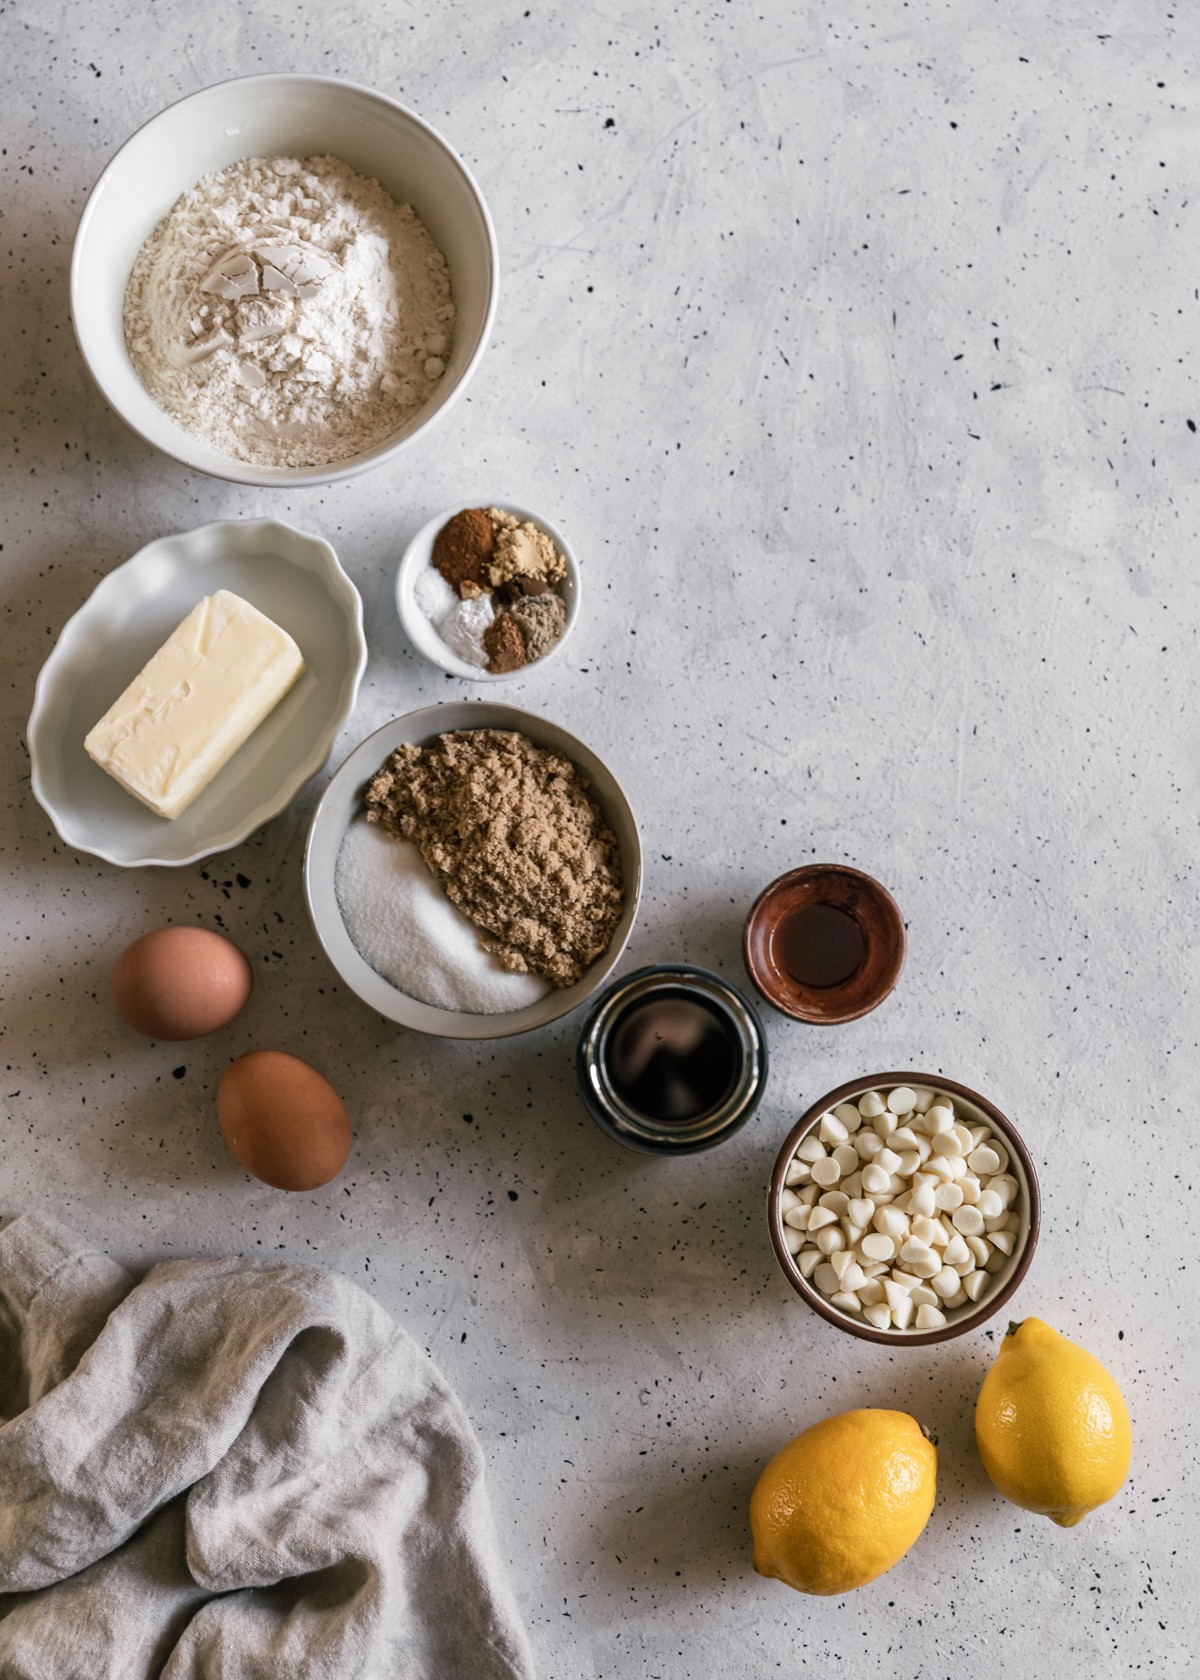 Various white bowls filled with flour, white sugar, brown sugar, spices, and butter on a grey speckled counter next to a jar of molasses, wood bowl of vanilla, eggs, 2 lemons, and a brown bowl of white chocolate.